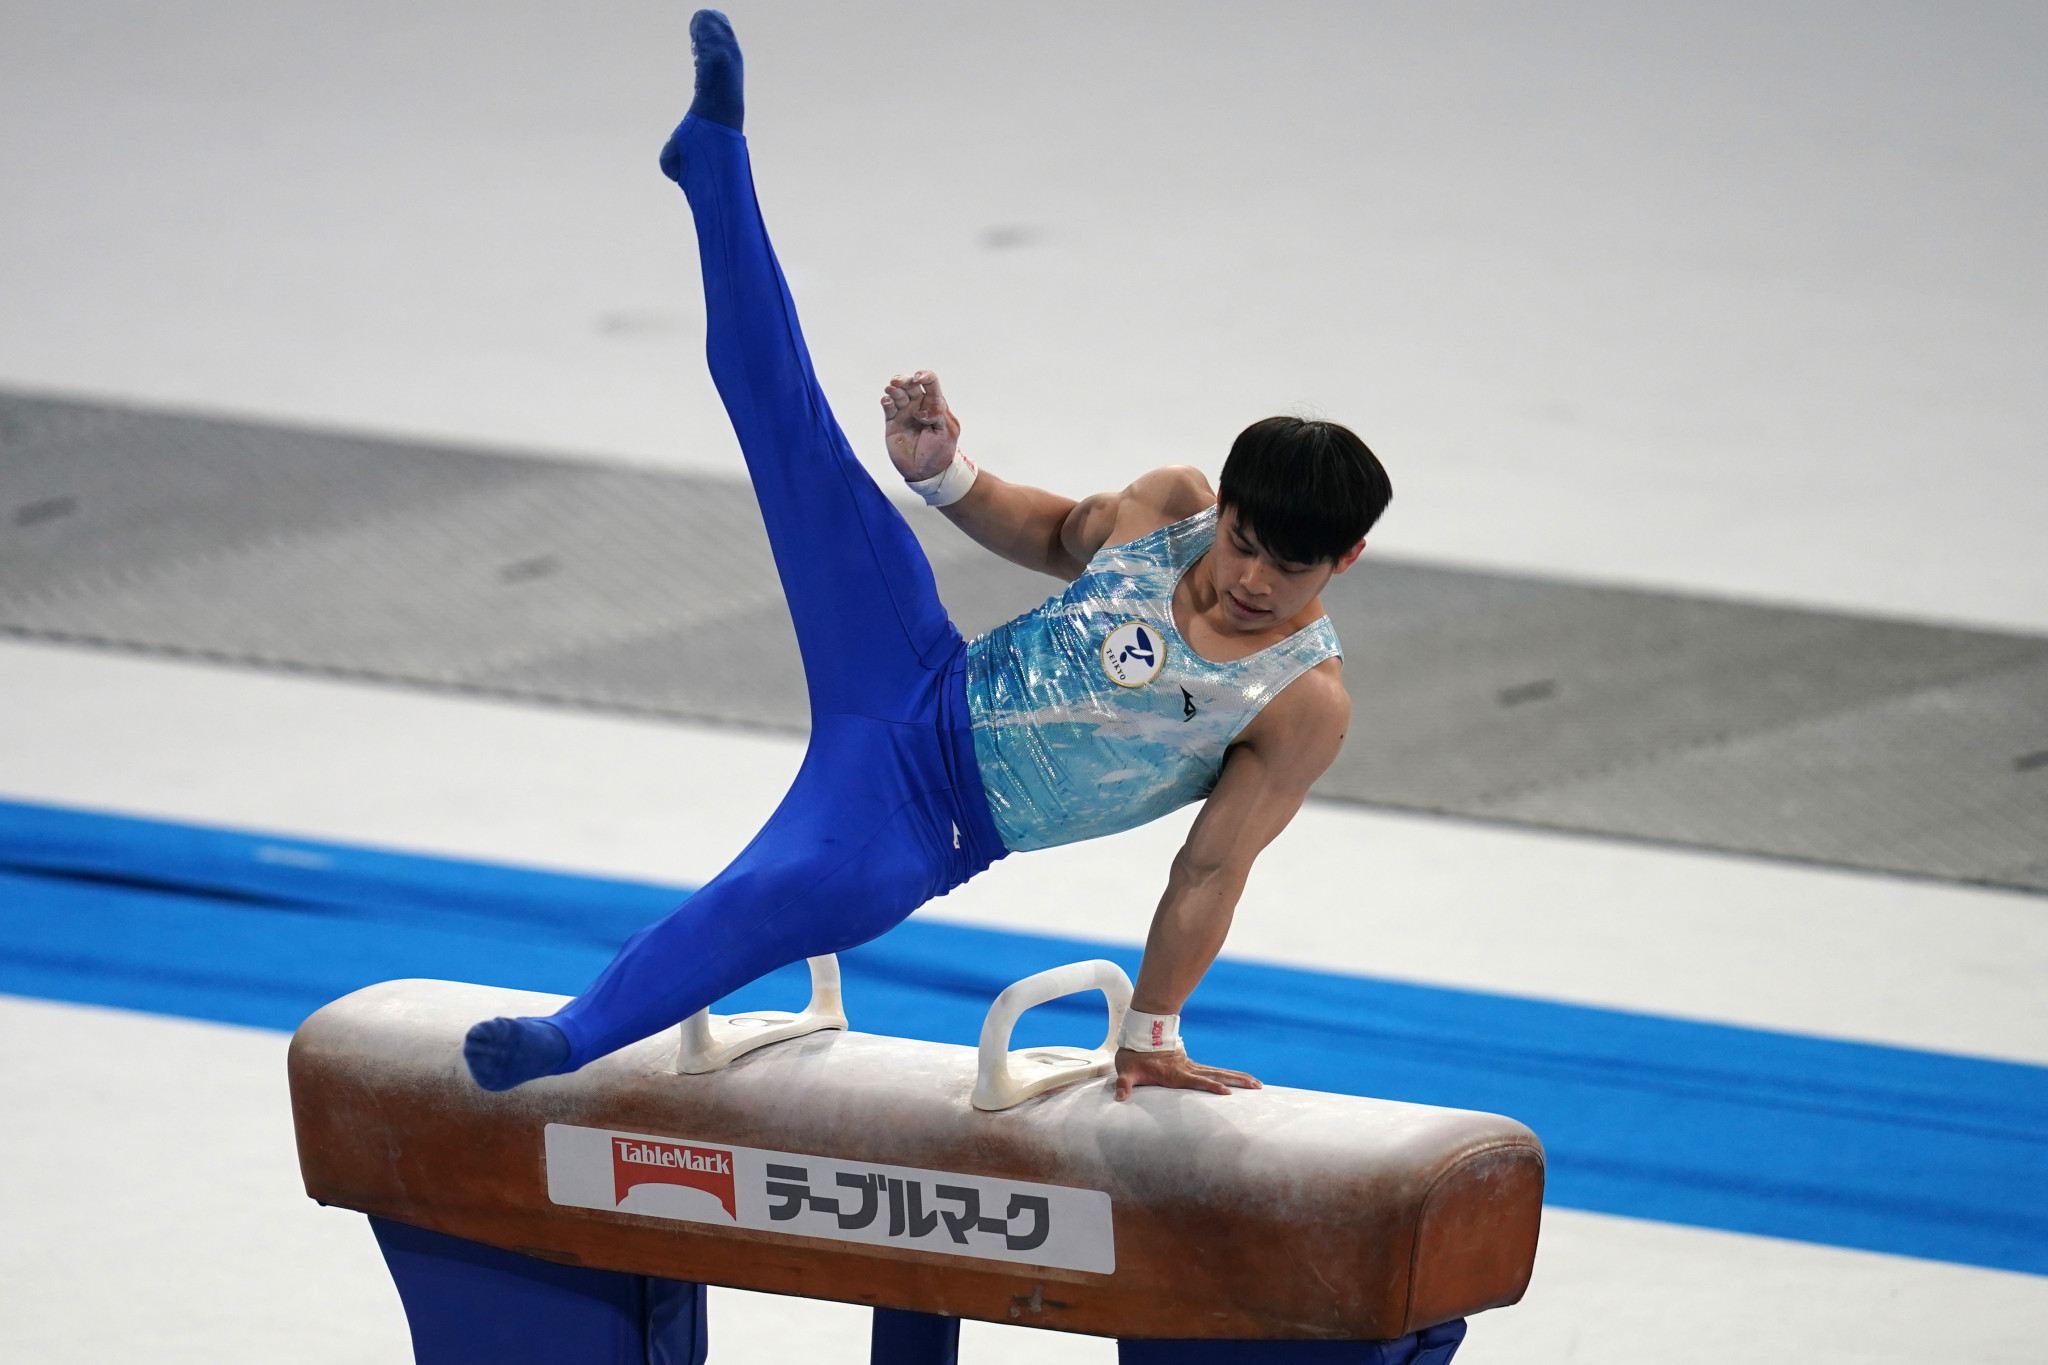 Asian champion Yulo victorious at FIG Artistic Gymnastics World Cup in Doha